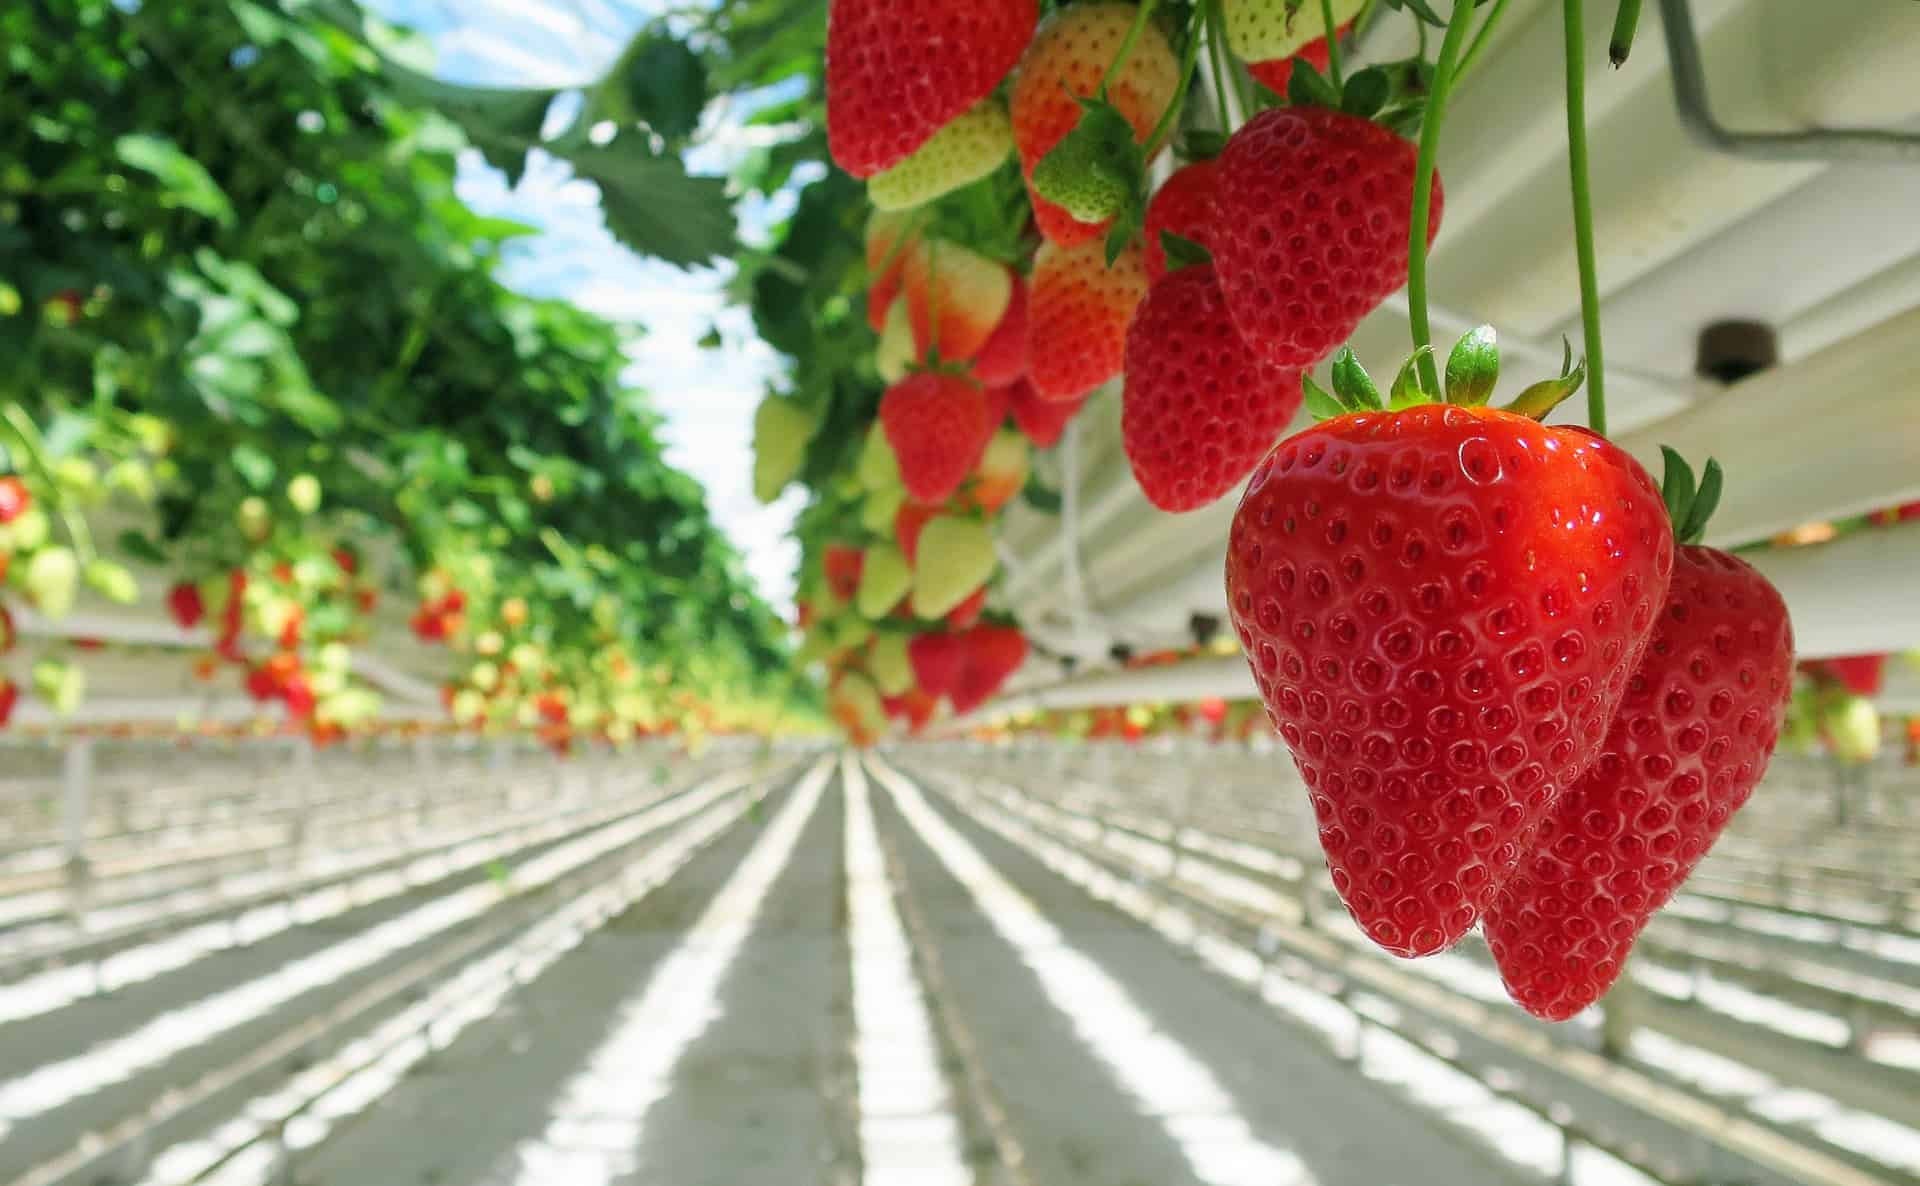 Best Hydroponic System for Strawberries